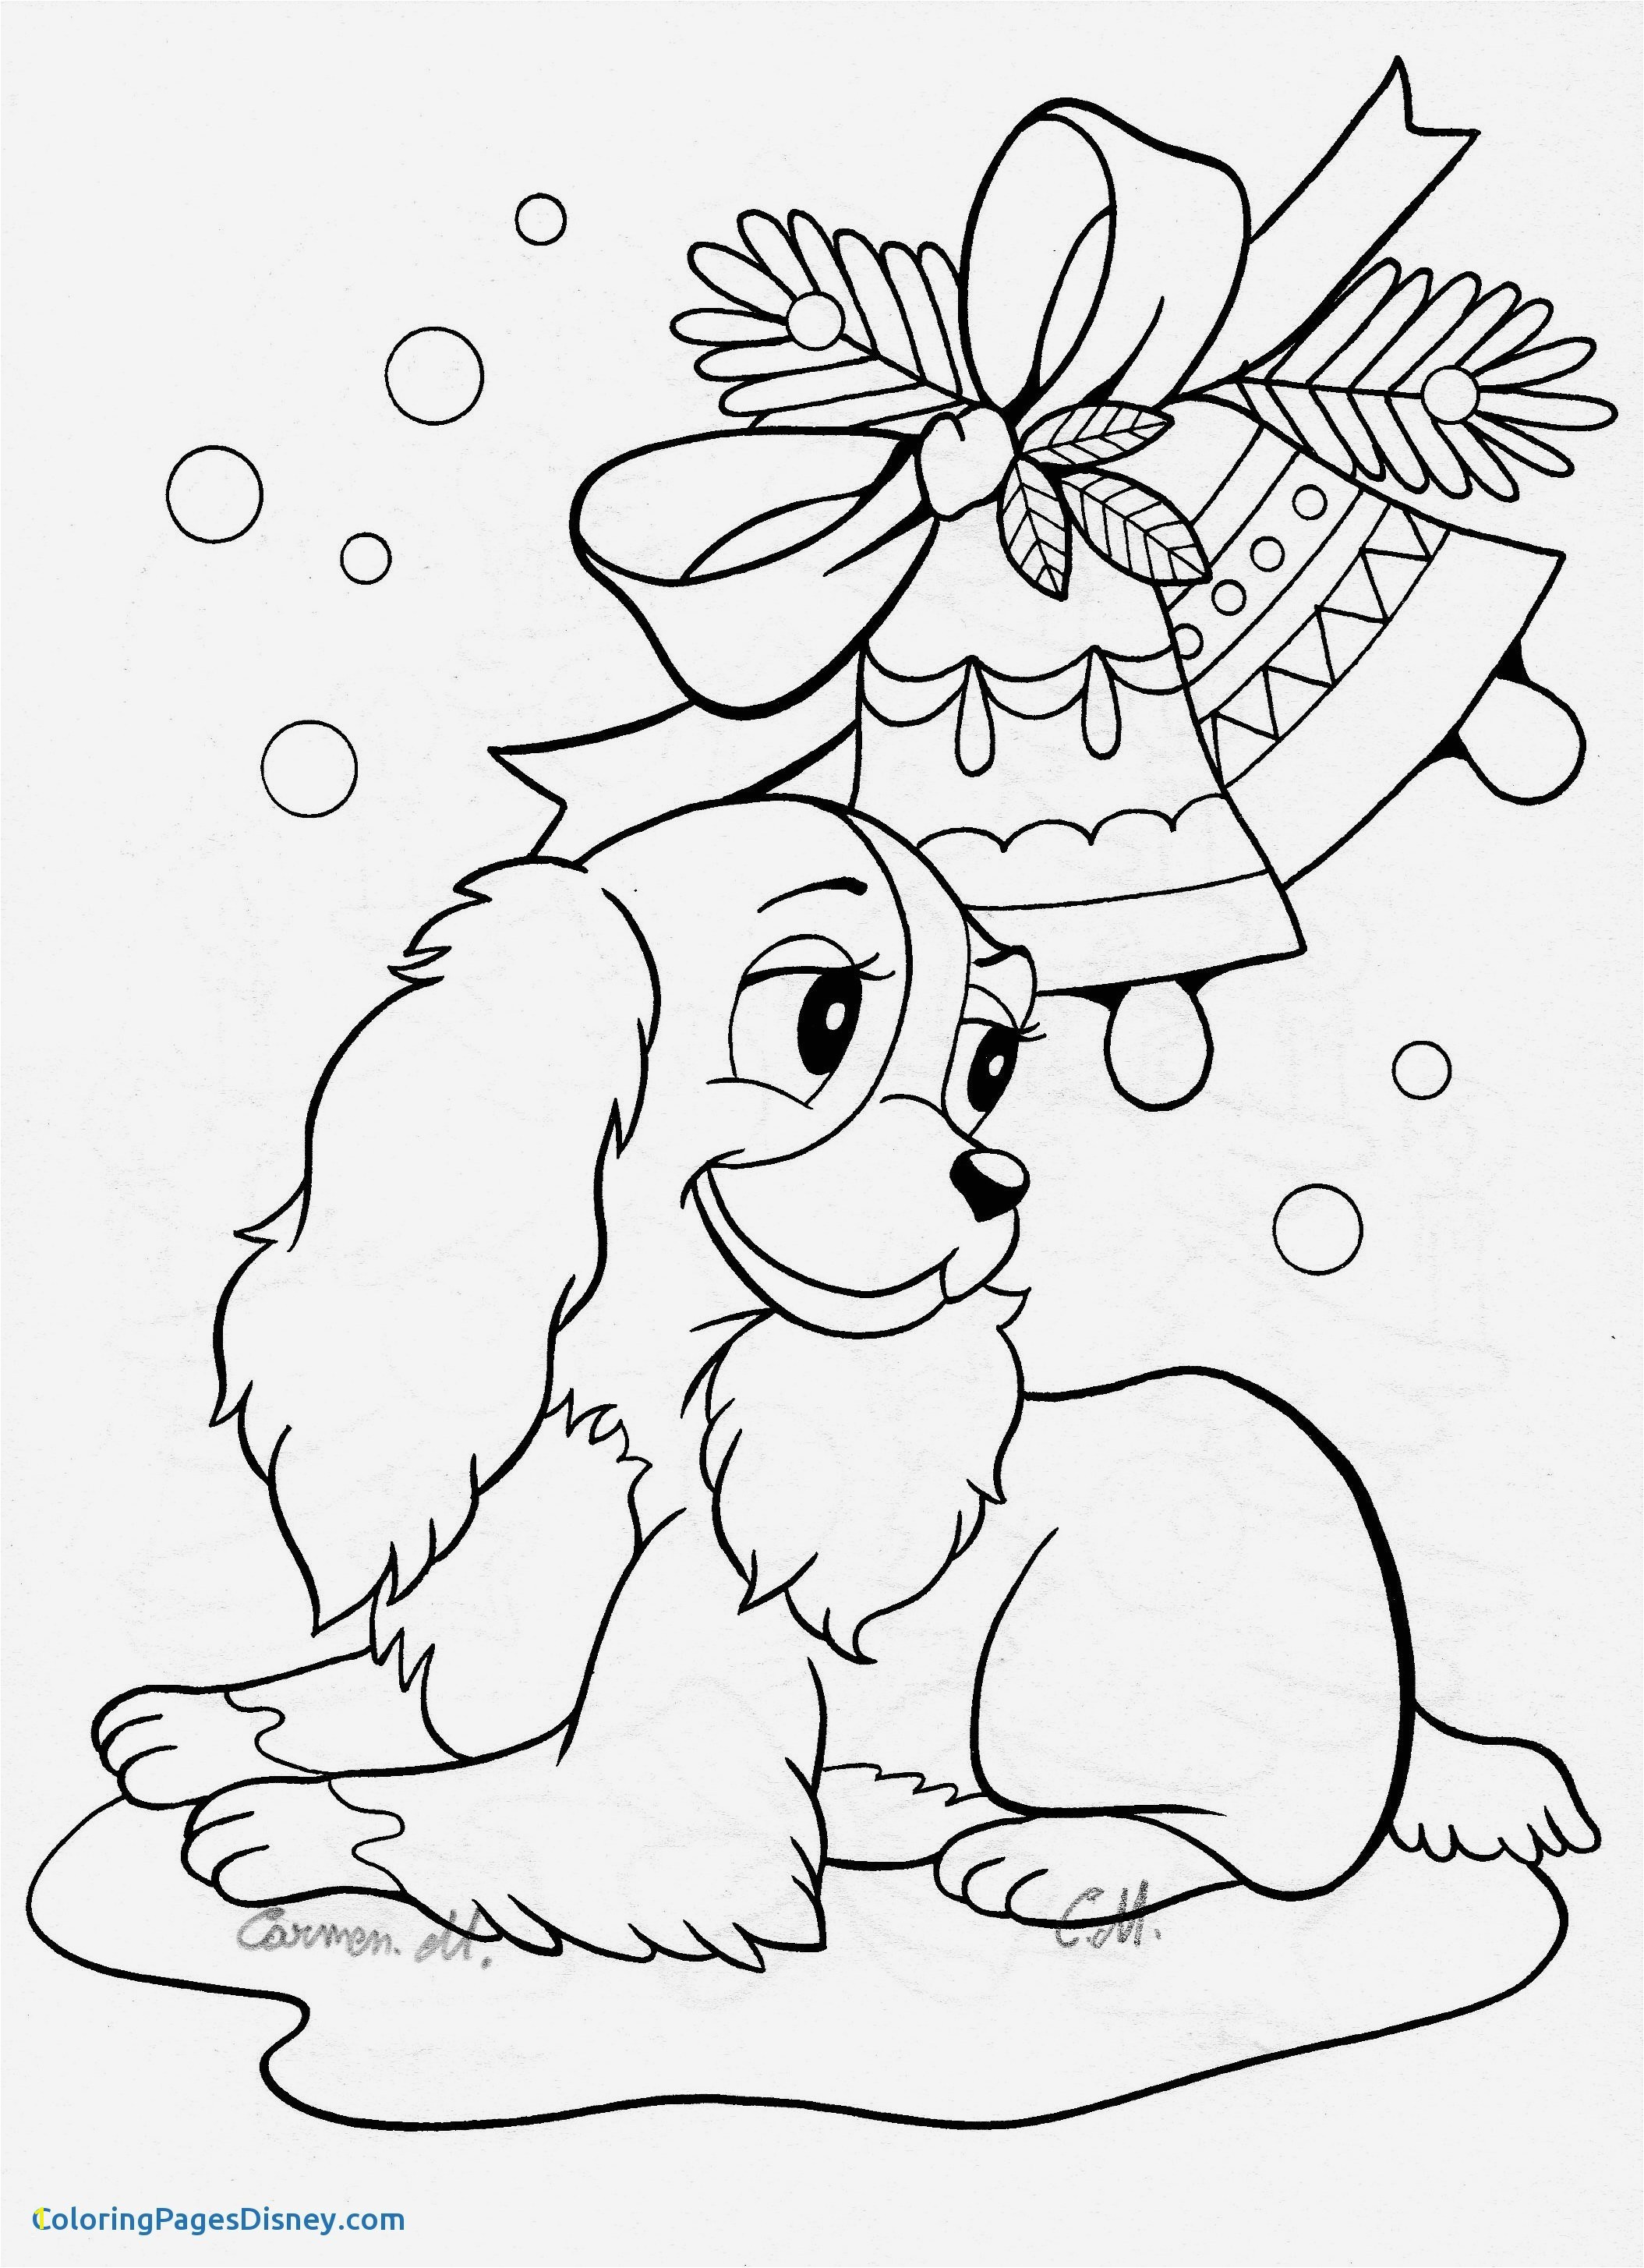 Coloring Pages Abc S Print 2018 Free Abc Coloring Pages to Print Katesgrove